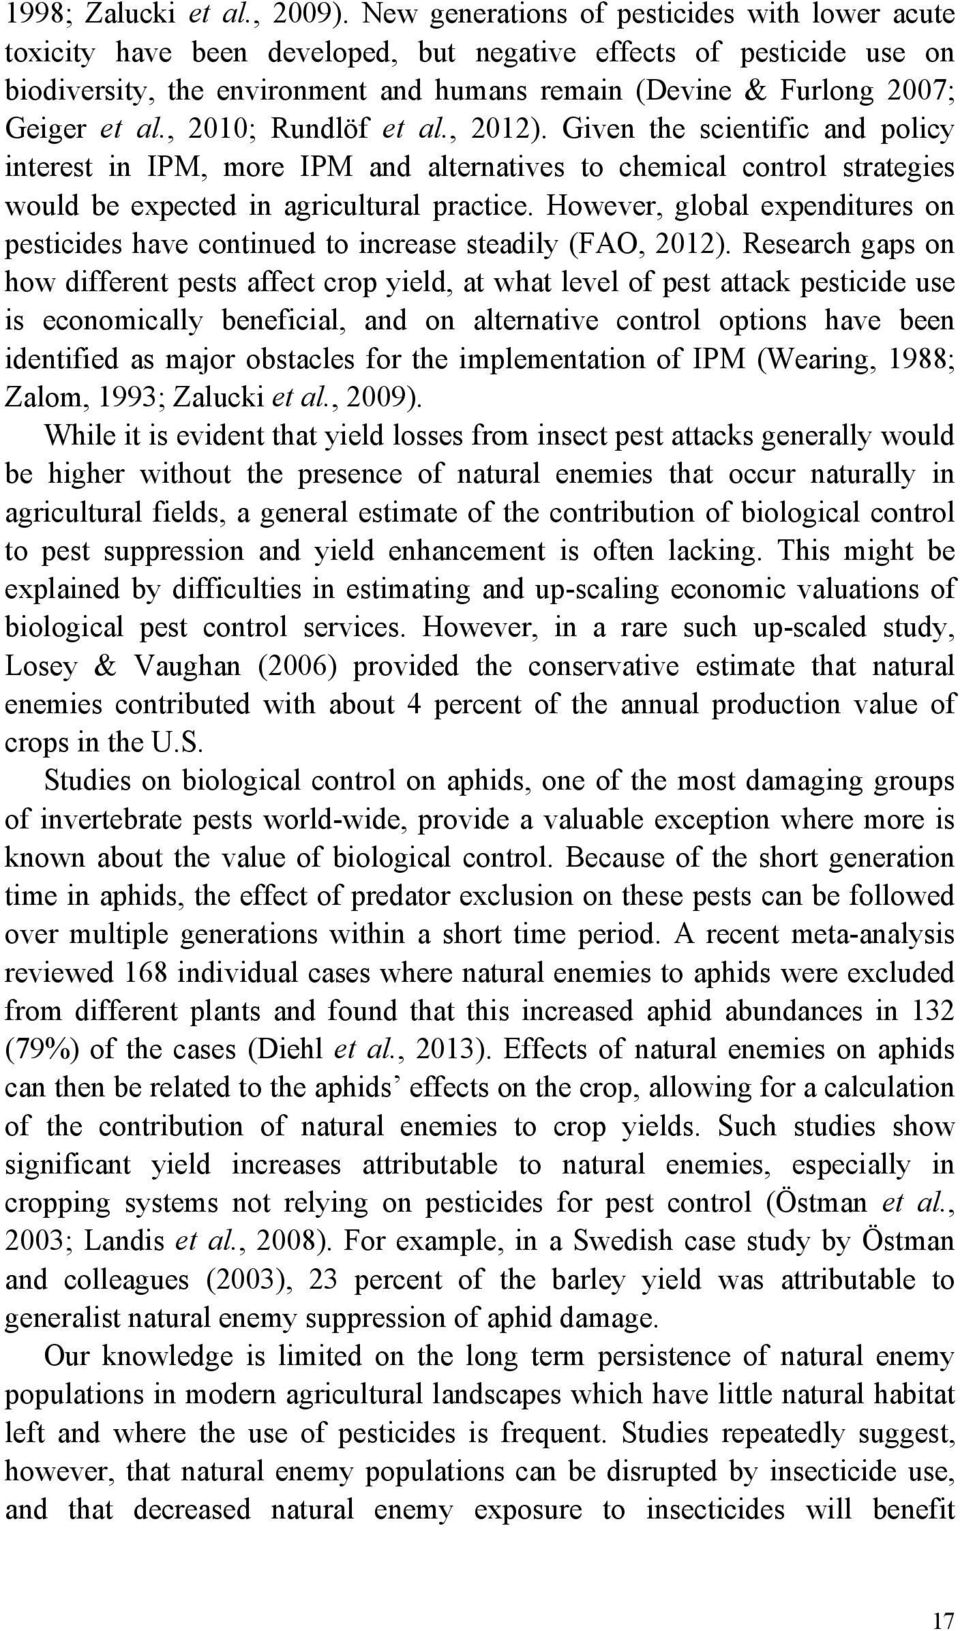 al., 2010; Rundlöf et al., 2012). Given the scientific and policy interest in IPM, more IPM and alternatives to chemical control strategies would be expected in agricultural practice.